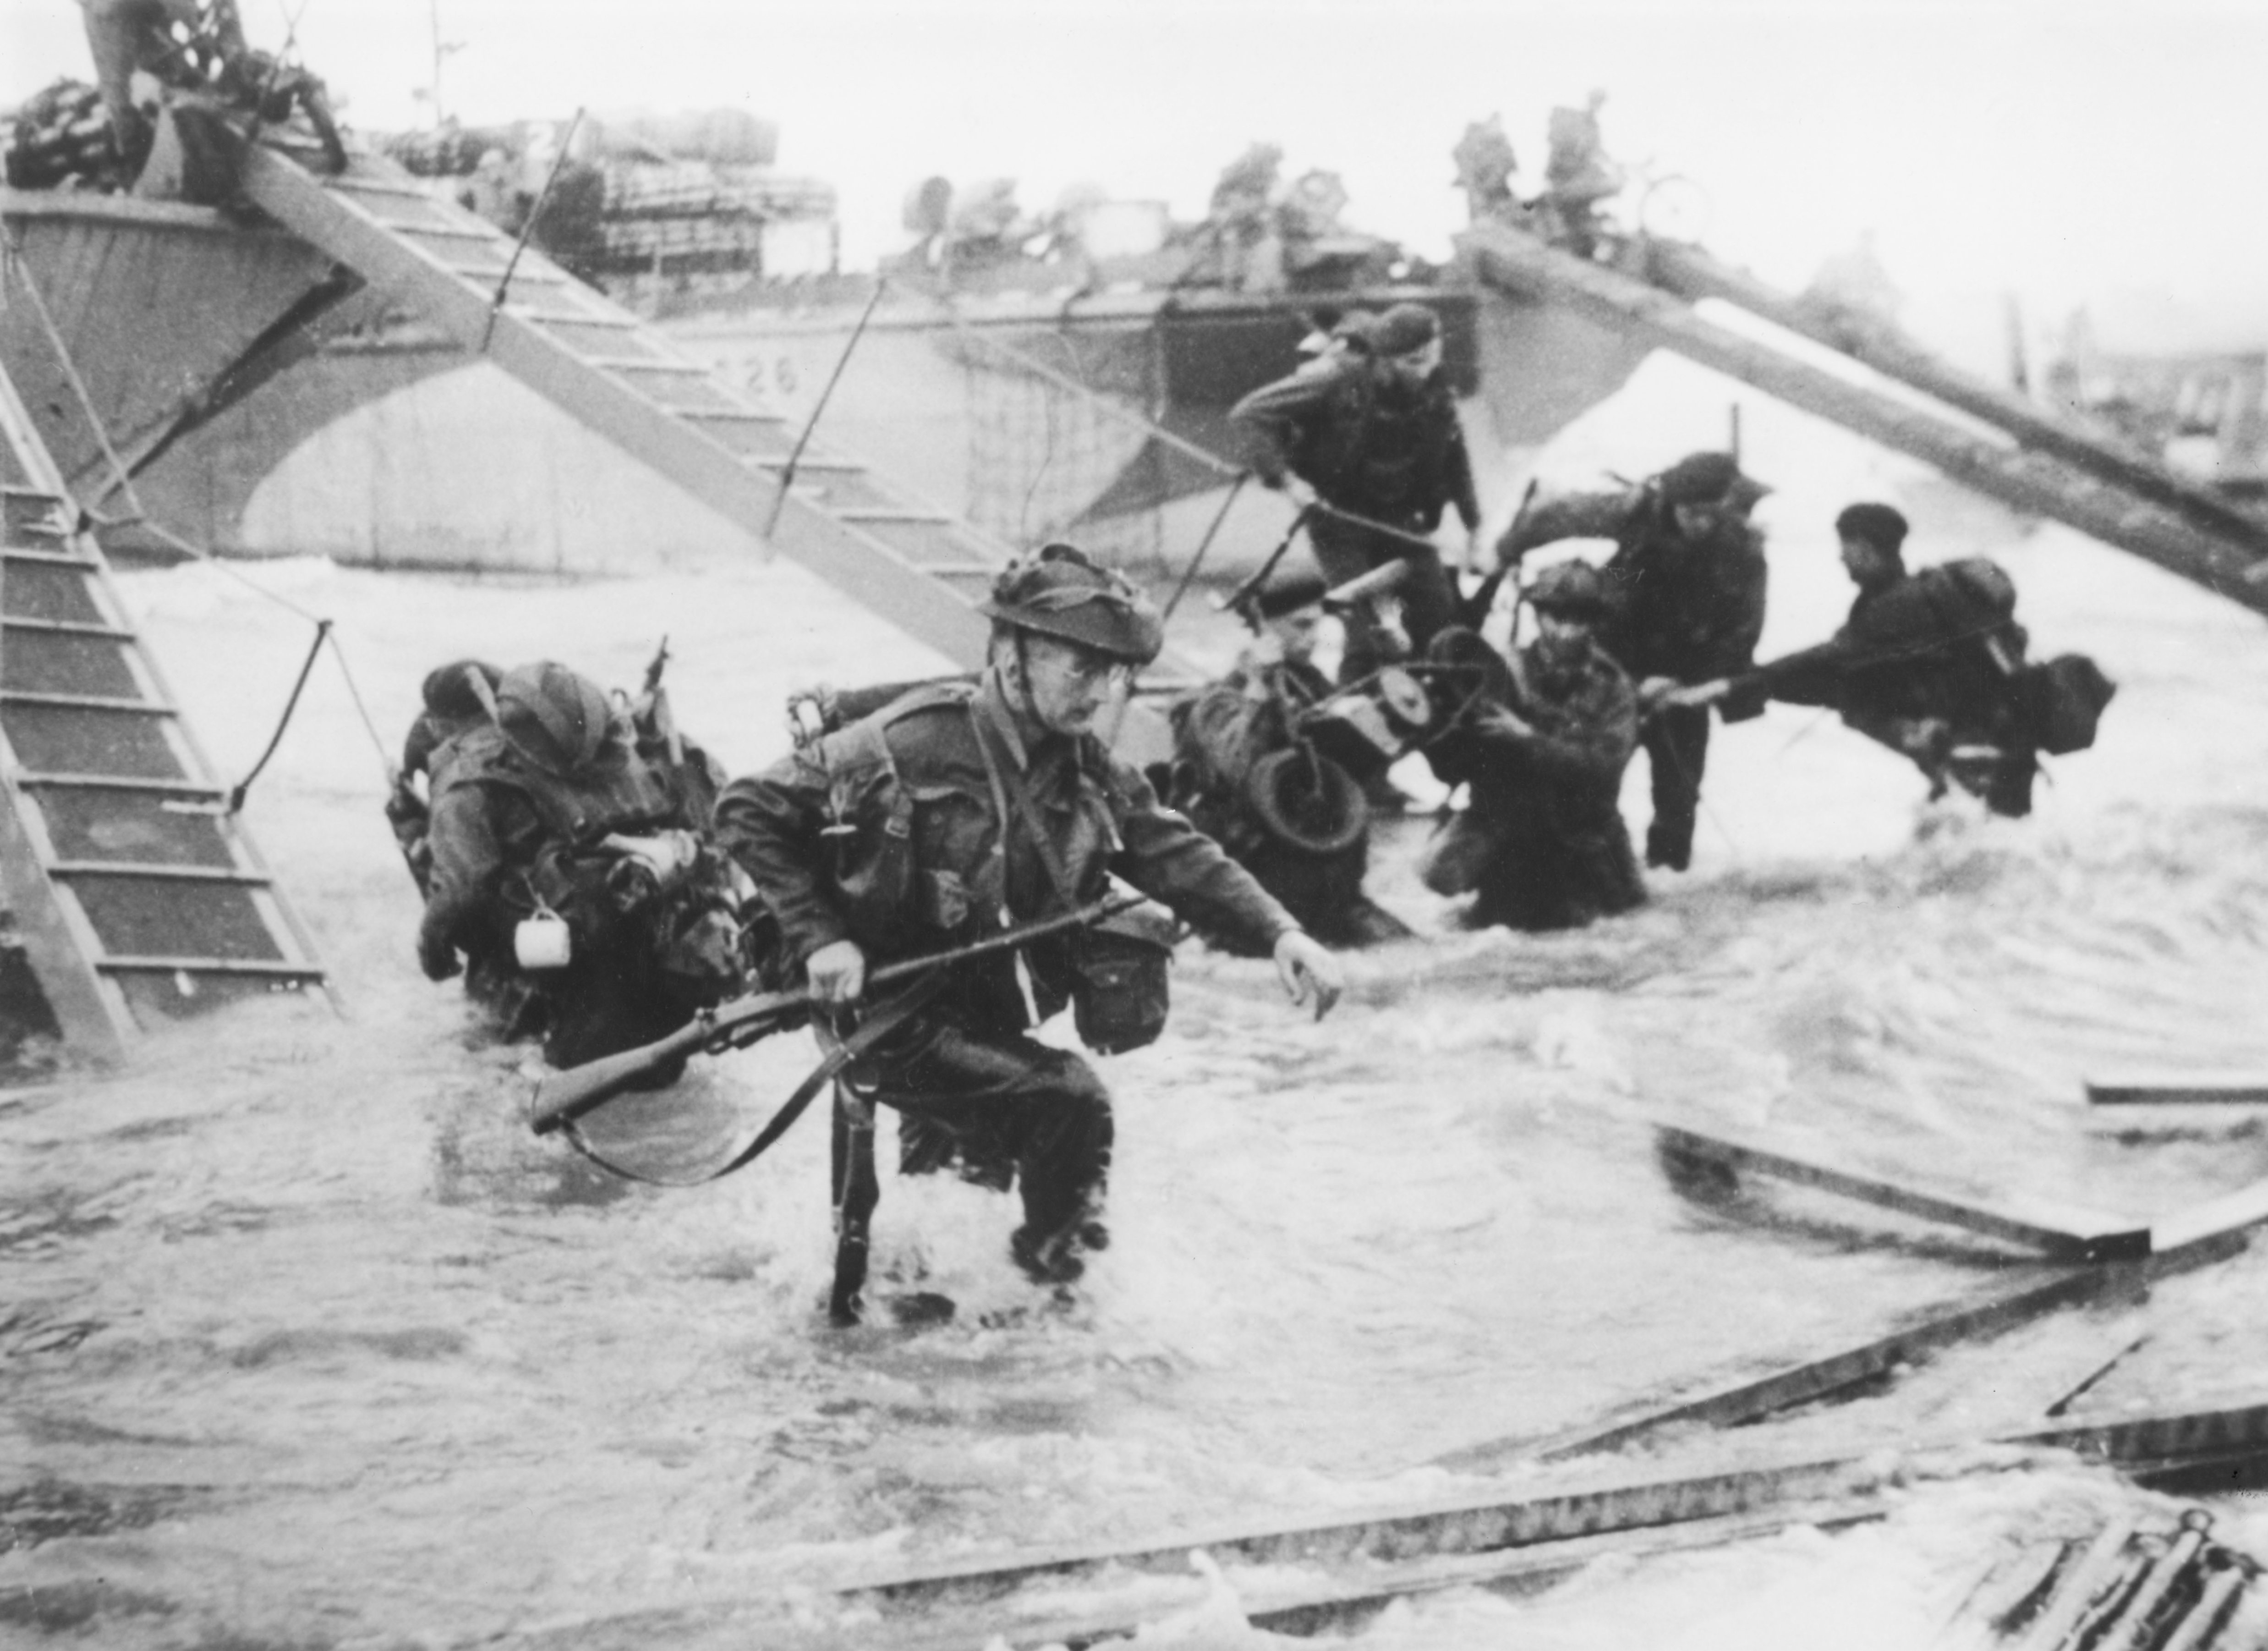 British troops make their way to Juno beach as the invasion gets under way